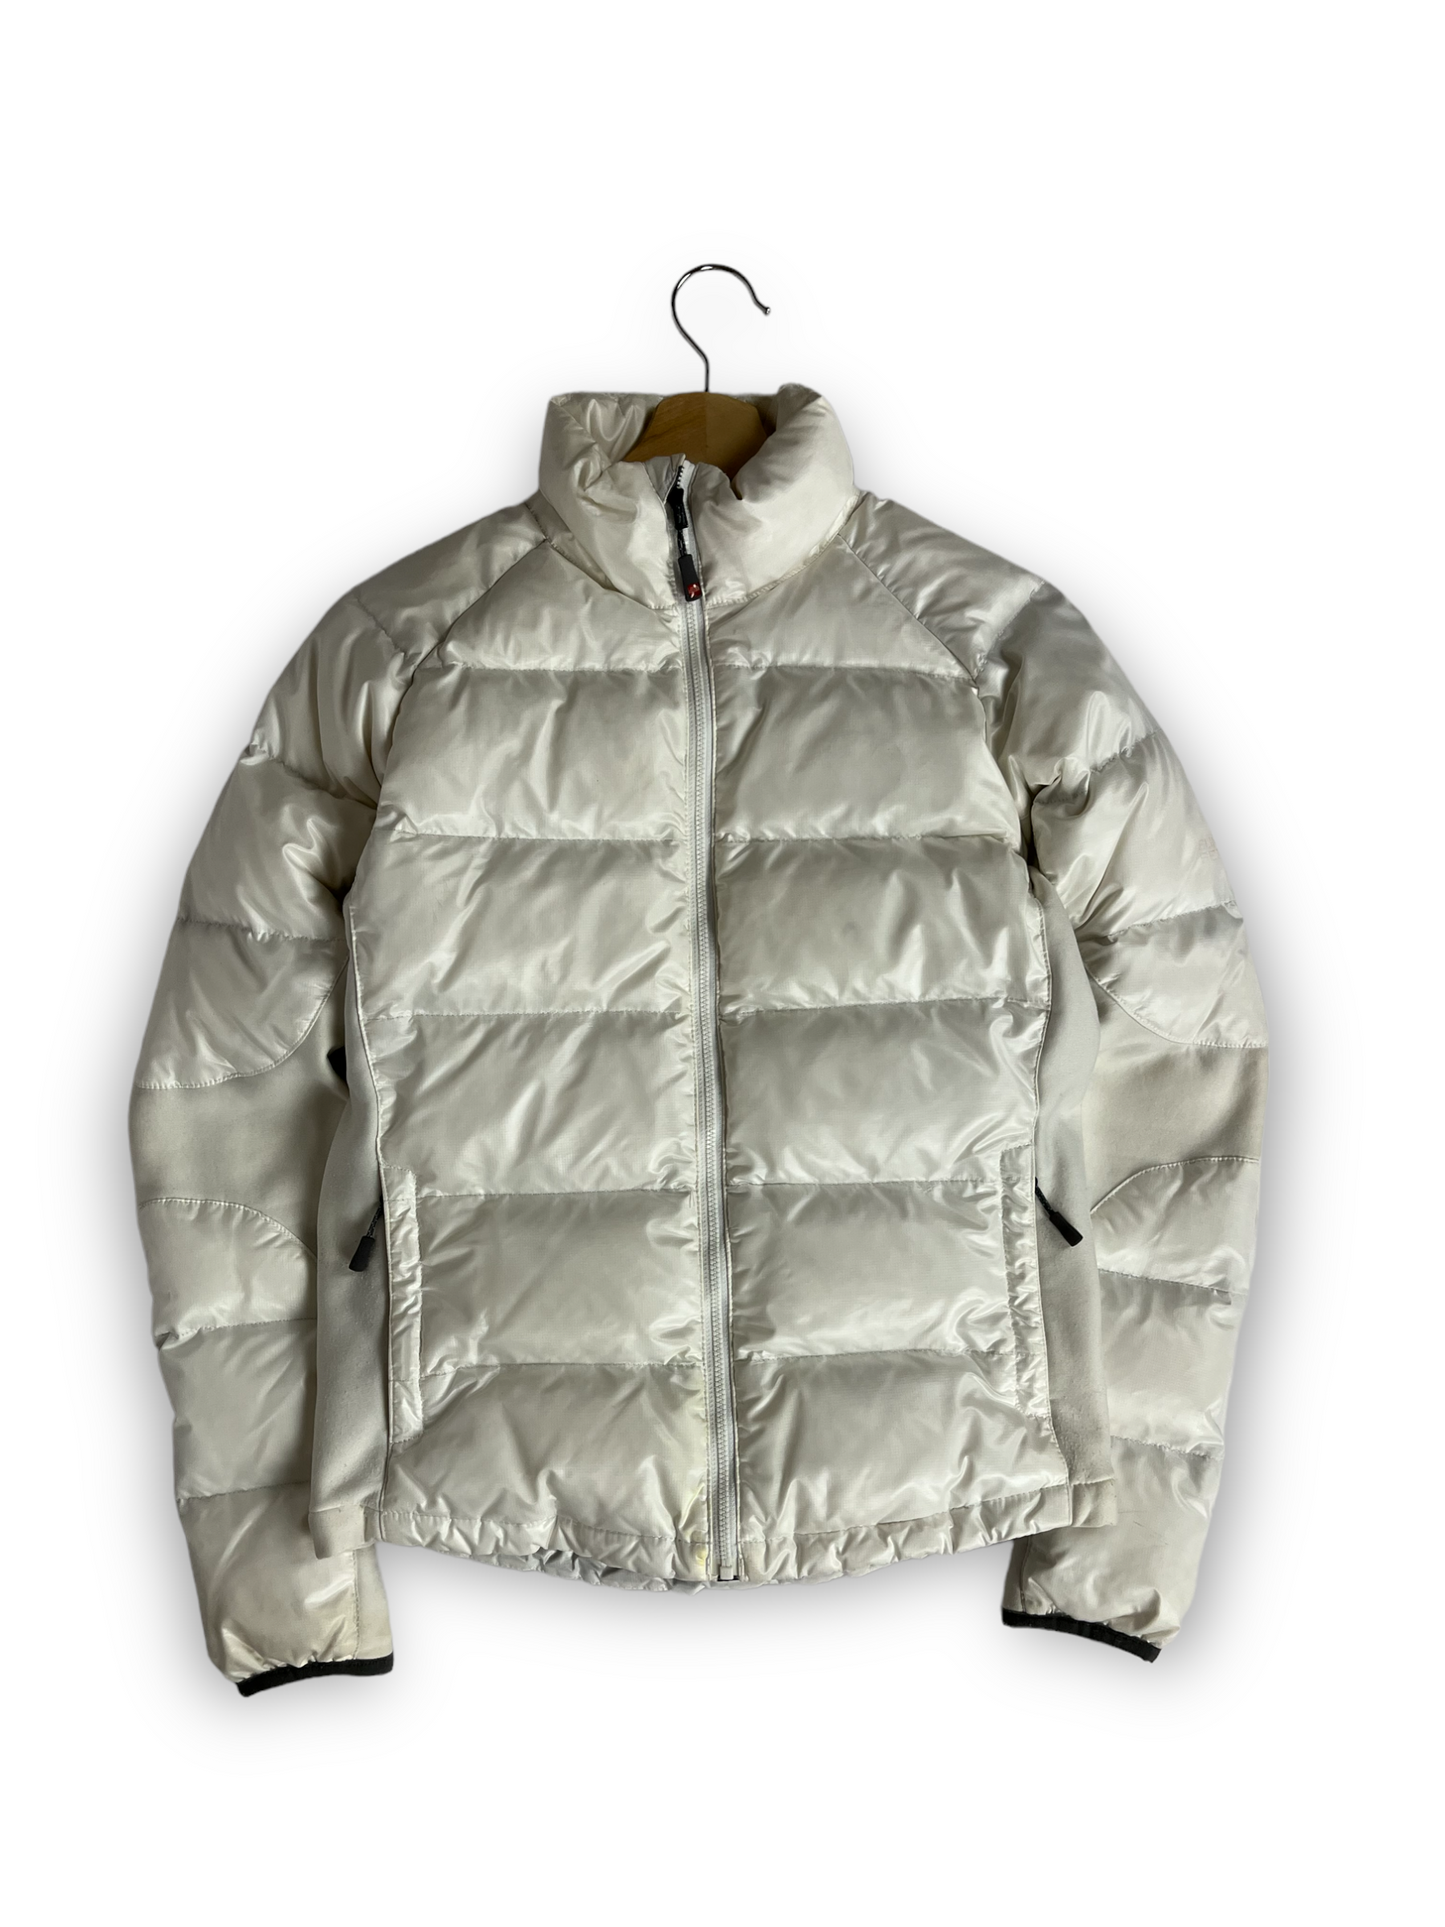 North face flight series white puffer